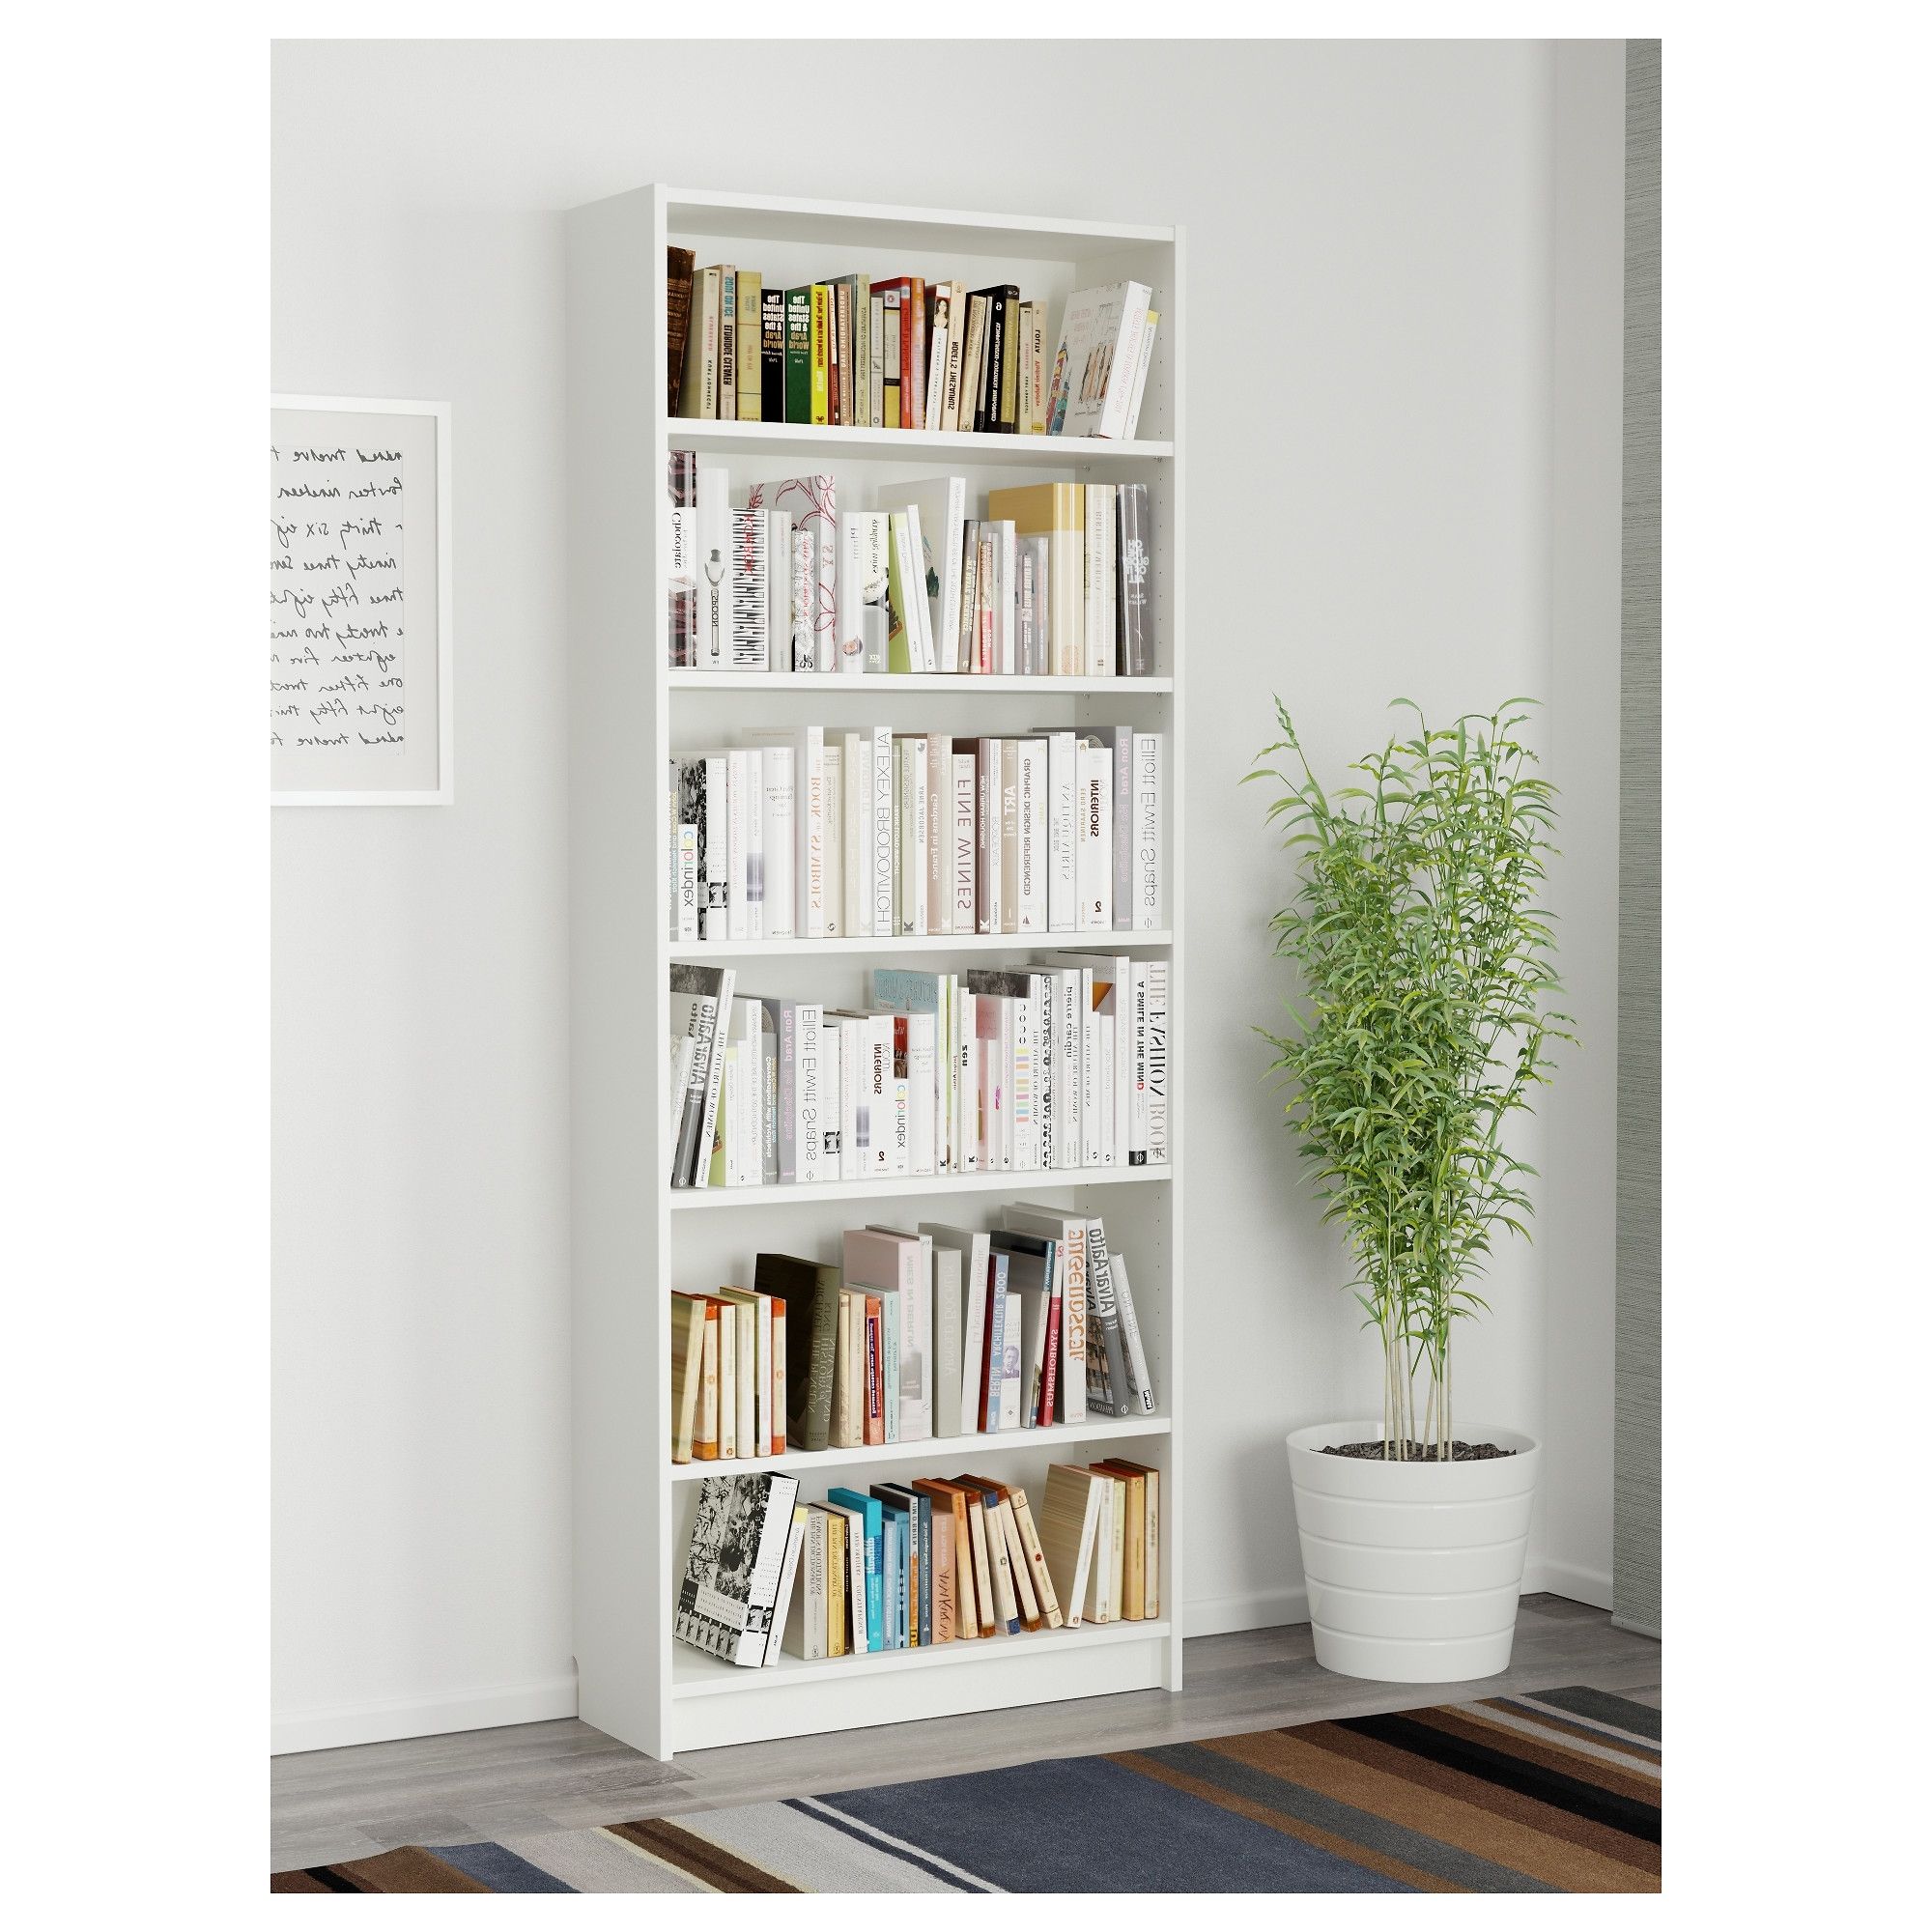 84 Inch Tall Bookcases Intended For Current Billy Bookcase – Black Brown – Ikea (View 11 of 15)